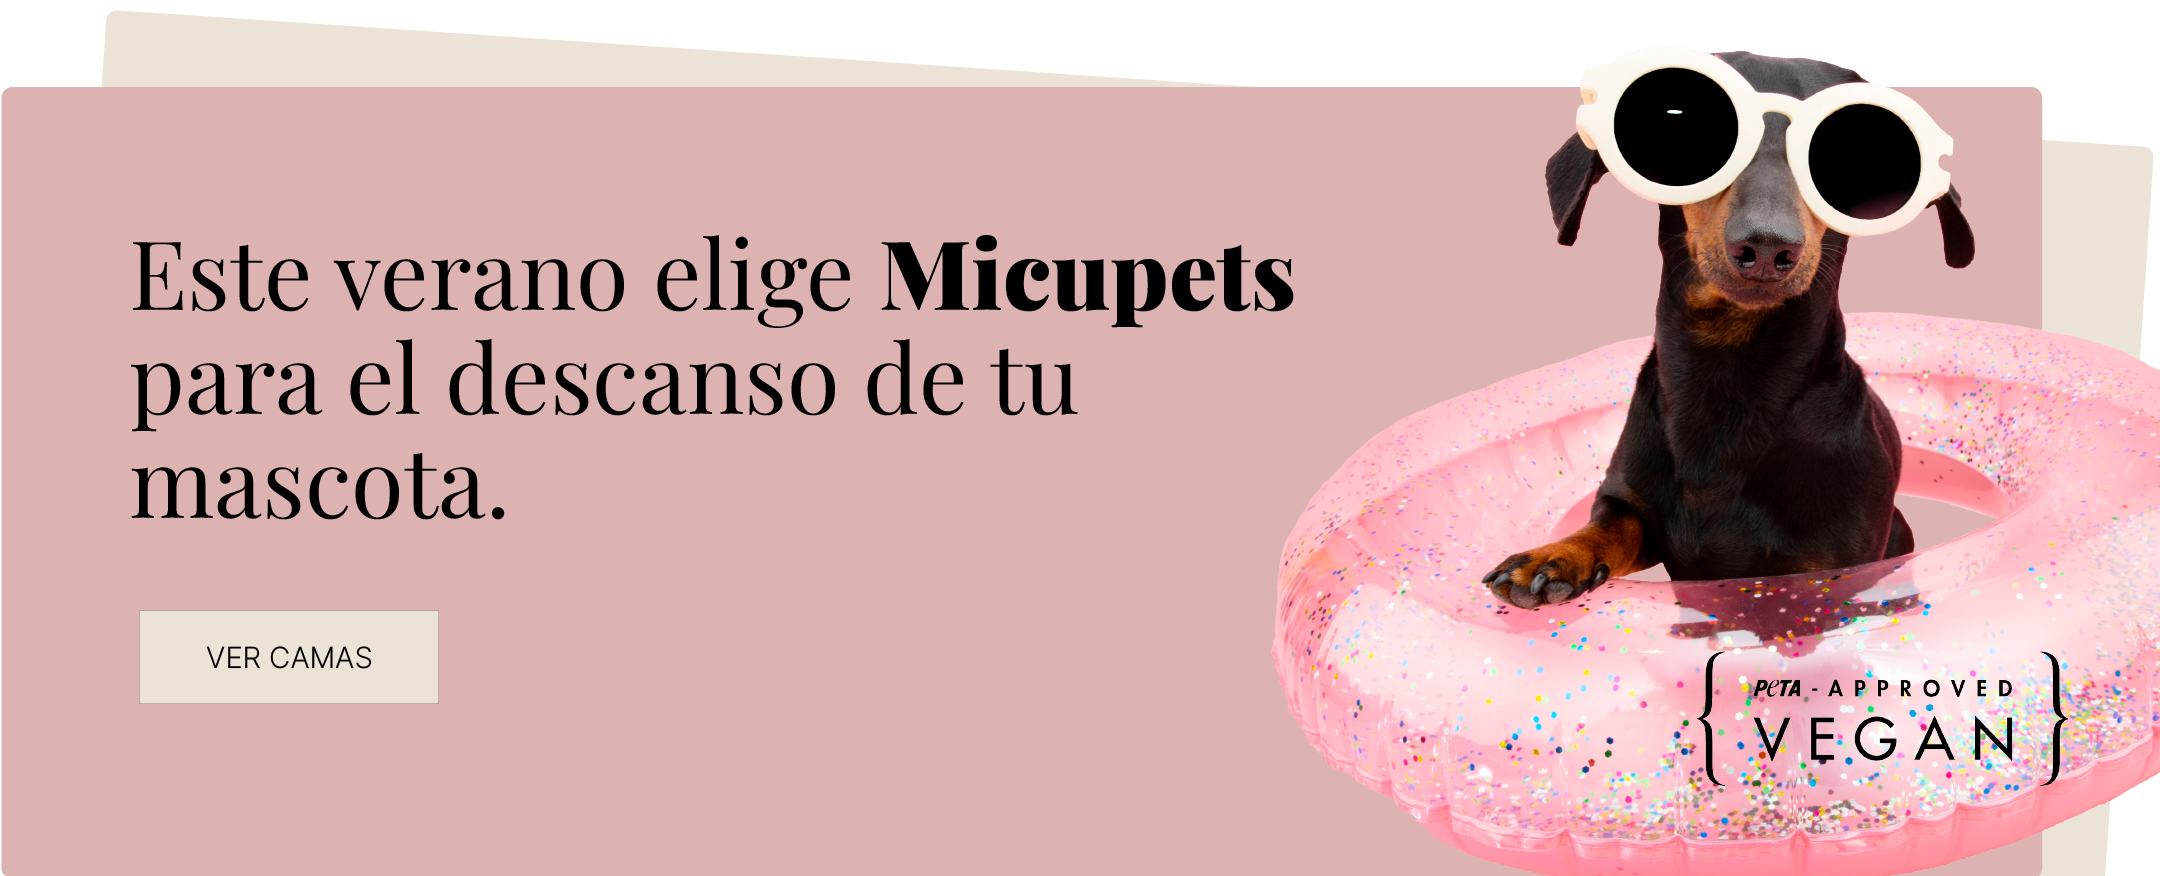 Micupets banner 1